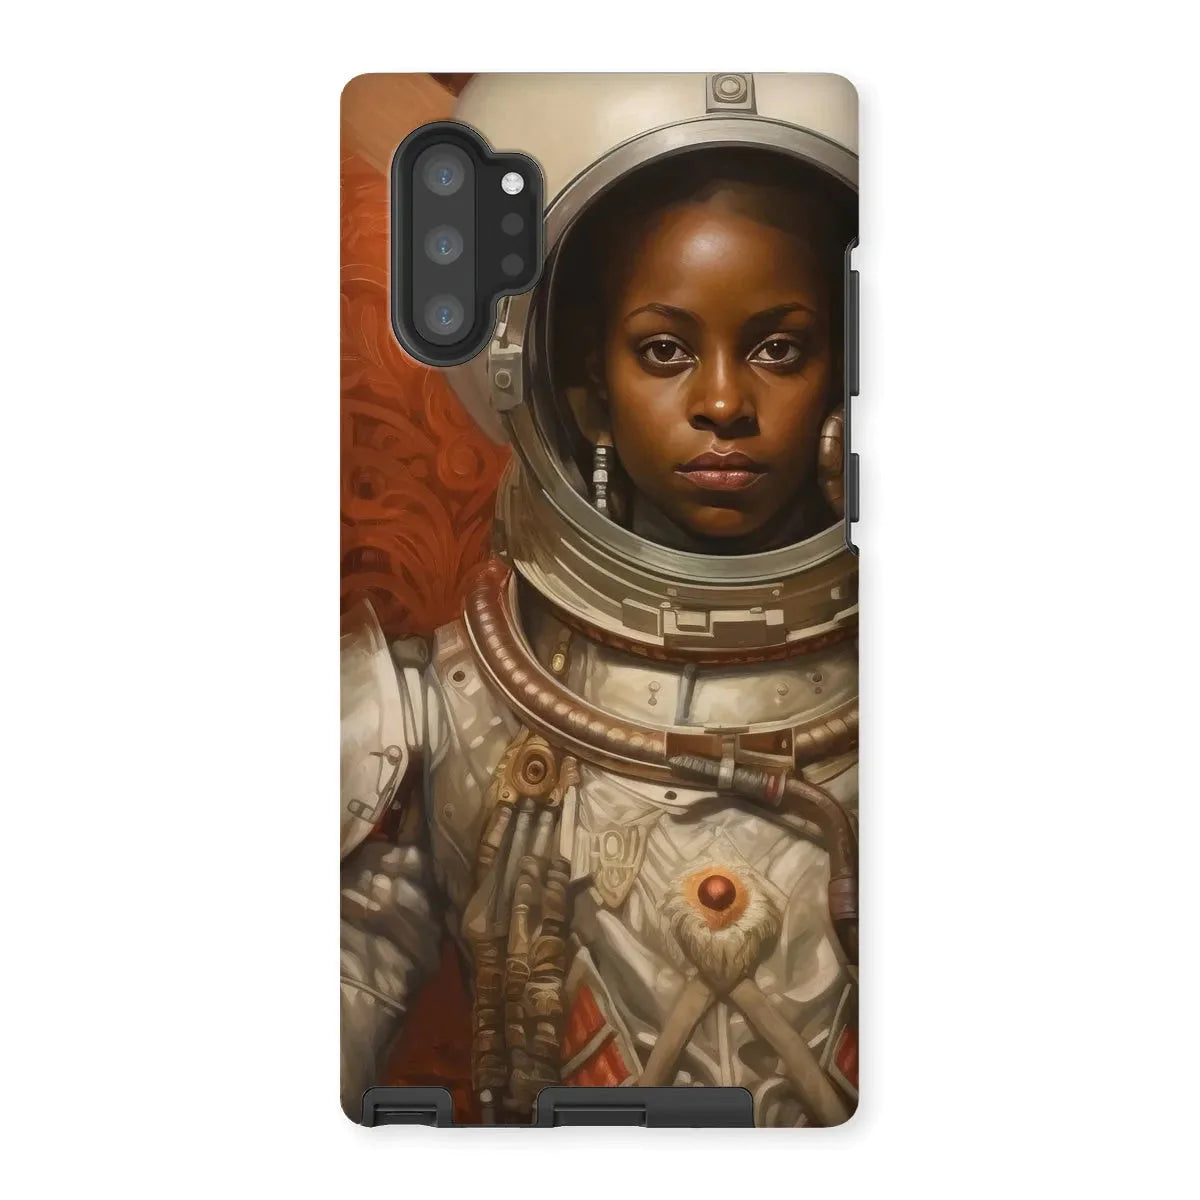 Ava The Lesbian Astronaut - Sapphic Aesthetic Phone Case - Samsung Galaxy Note 10p / Matte - Mobile Phone Cases